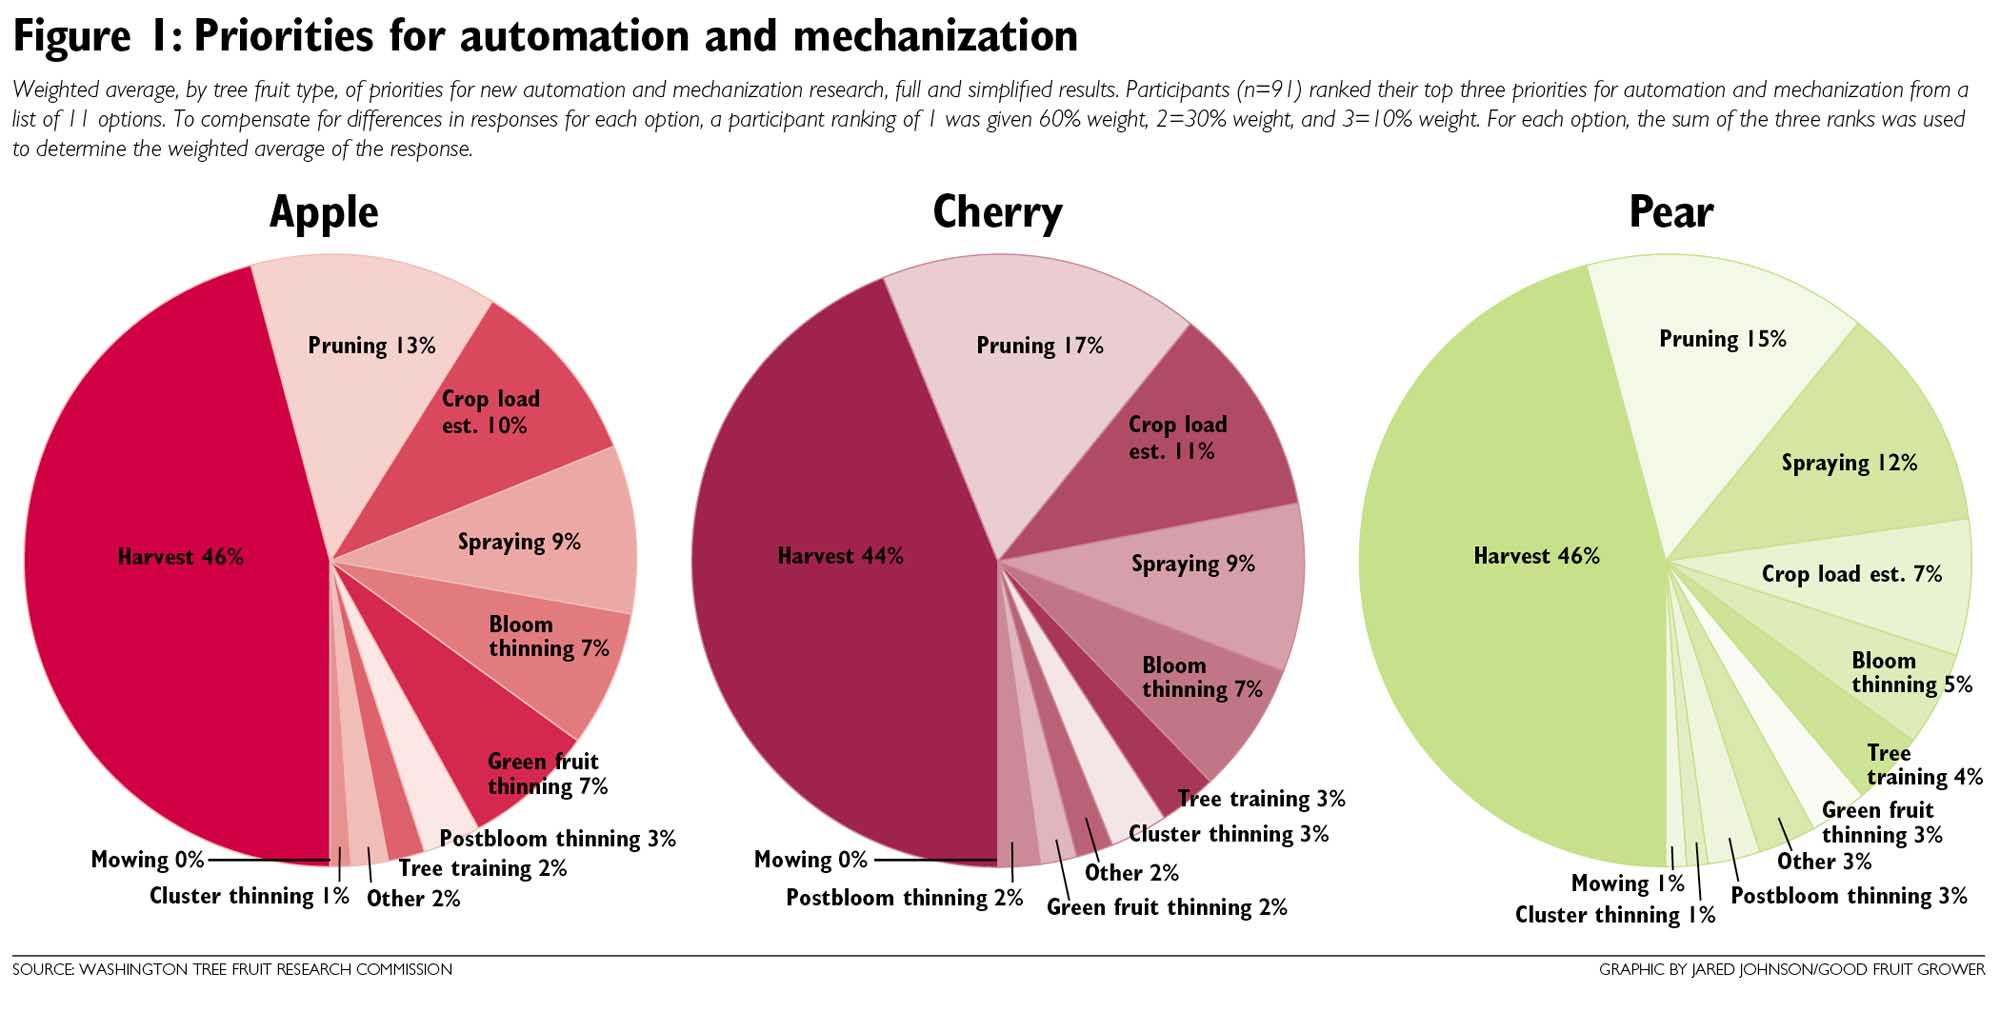 Figure 1: Priorities for automation and mechanization. Weighted average, by tree fruit type, of priorities for new automation and mechanization research, full and simplified results. Participants (n=91) ranked their top three priorities for automation and mechanization from a list of 11 options. To compensate for differences in responses for each option, a participant ranking of 1 was given 60% weight, 2=30% weight, and 3=10% weight. For each option, the sum of the three ranks was used to determine the weighted average of the response. Source: Washington Tree Fruit Research Commission. Graphic by Jared Johnson/Good Fruit Grower)